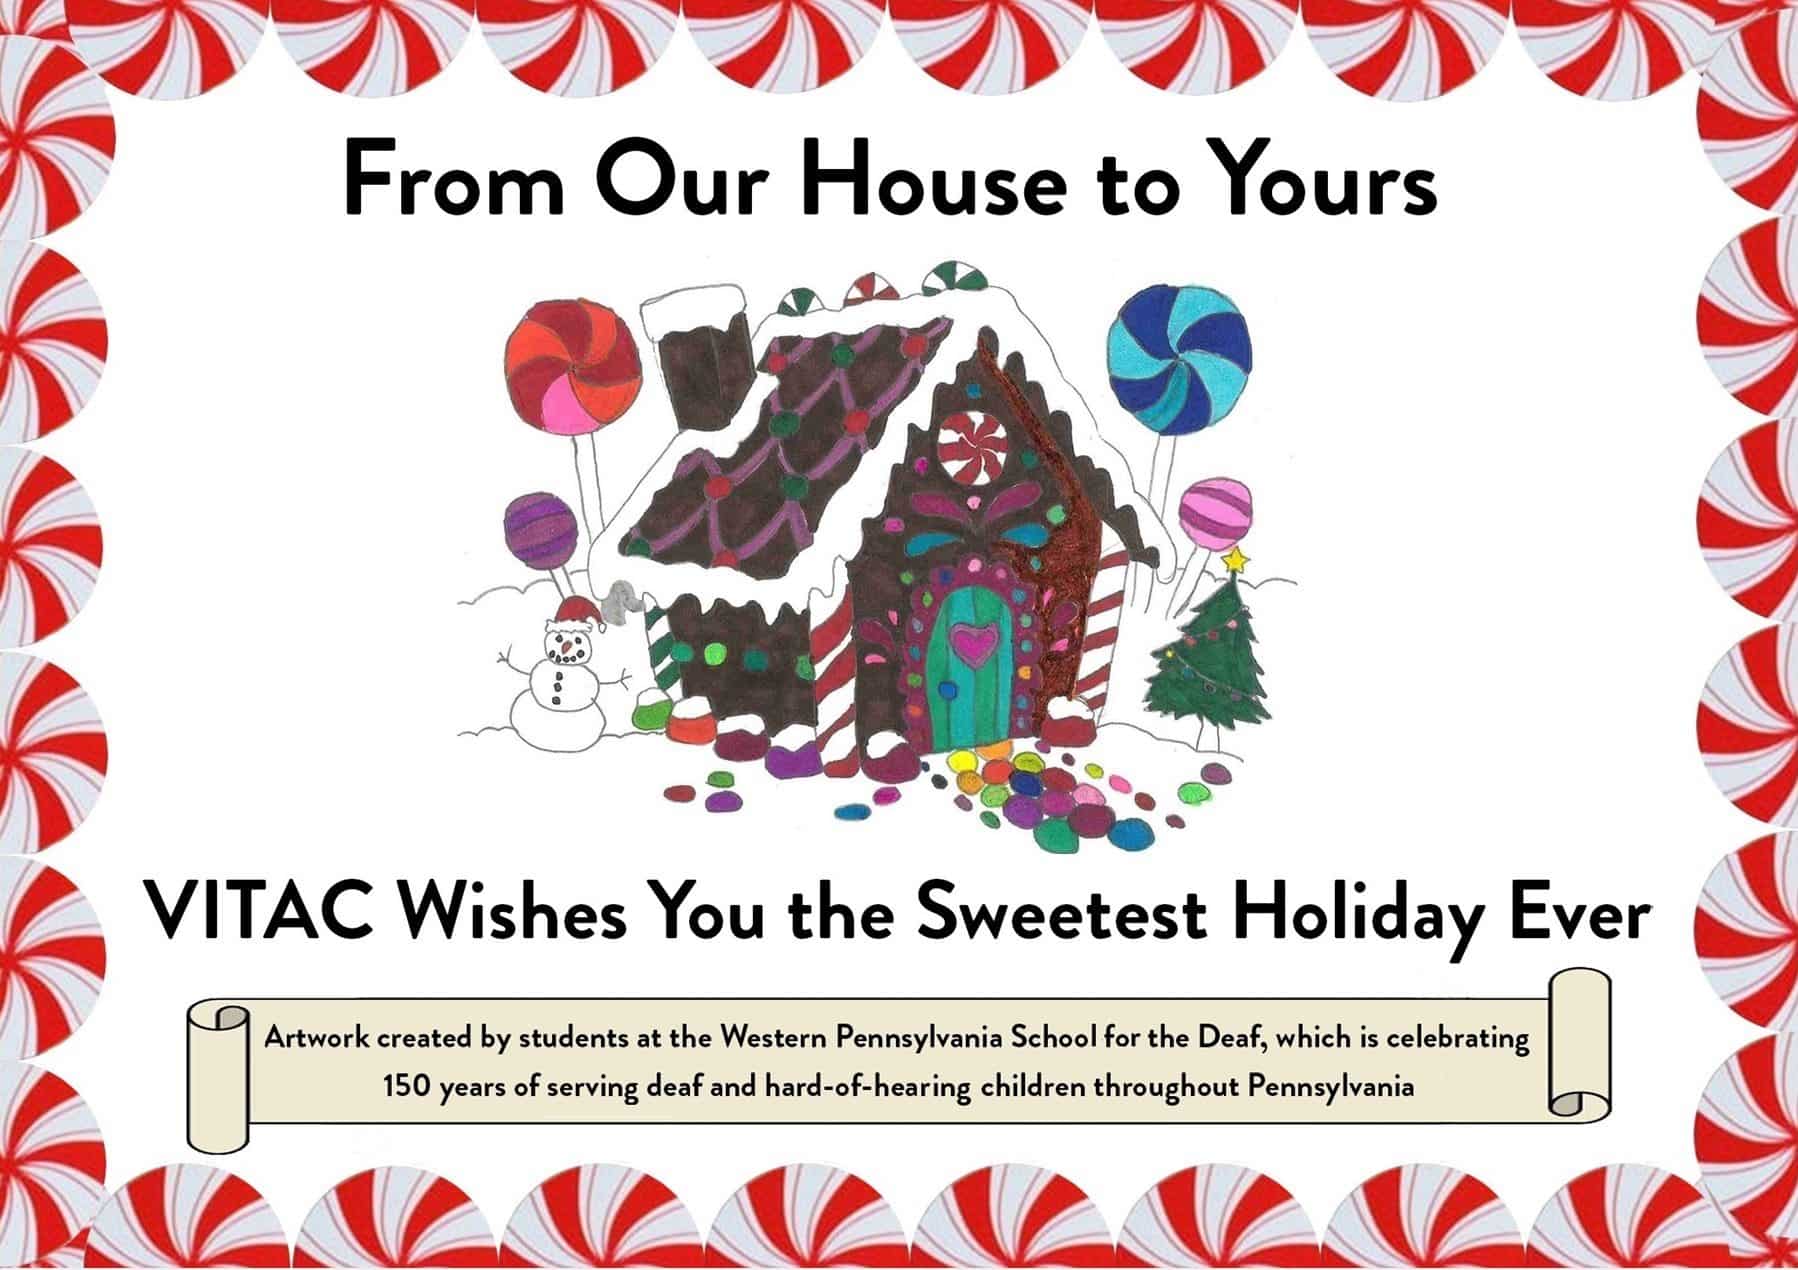 VITAC Holiday card, reading "From Our House to Yours, VITAC Wishes You the Sweetest Holiday Ever"